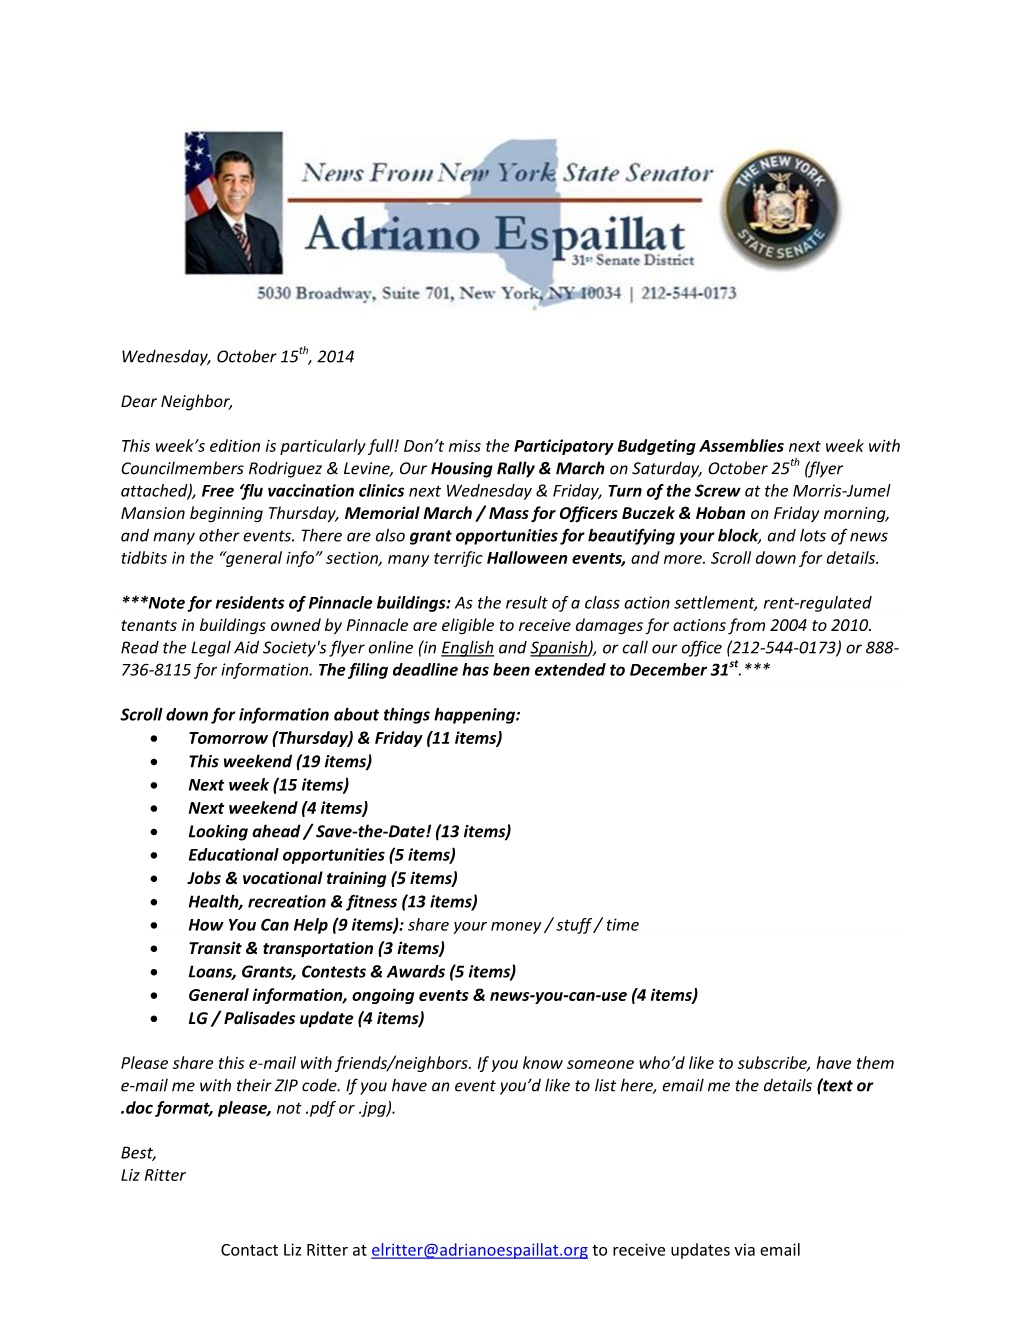 Contact Liz Ritter at Elritter@Adrianoespaillat.Org to Receive Updates Via Email